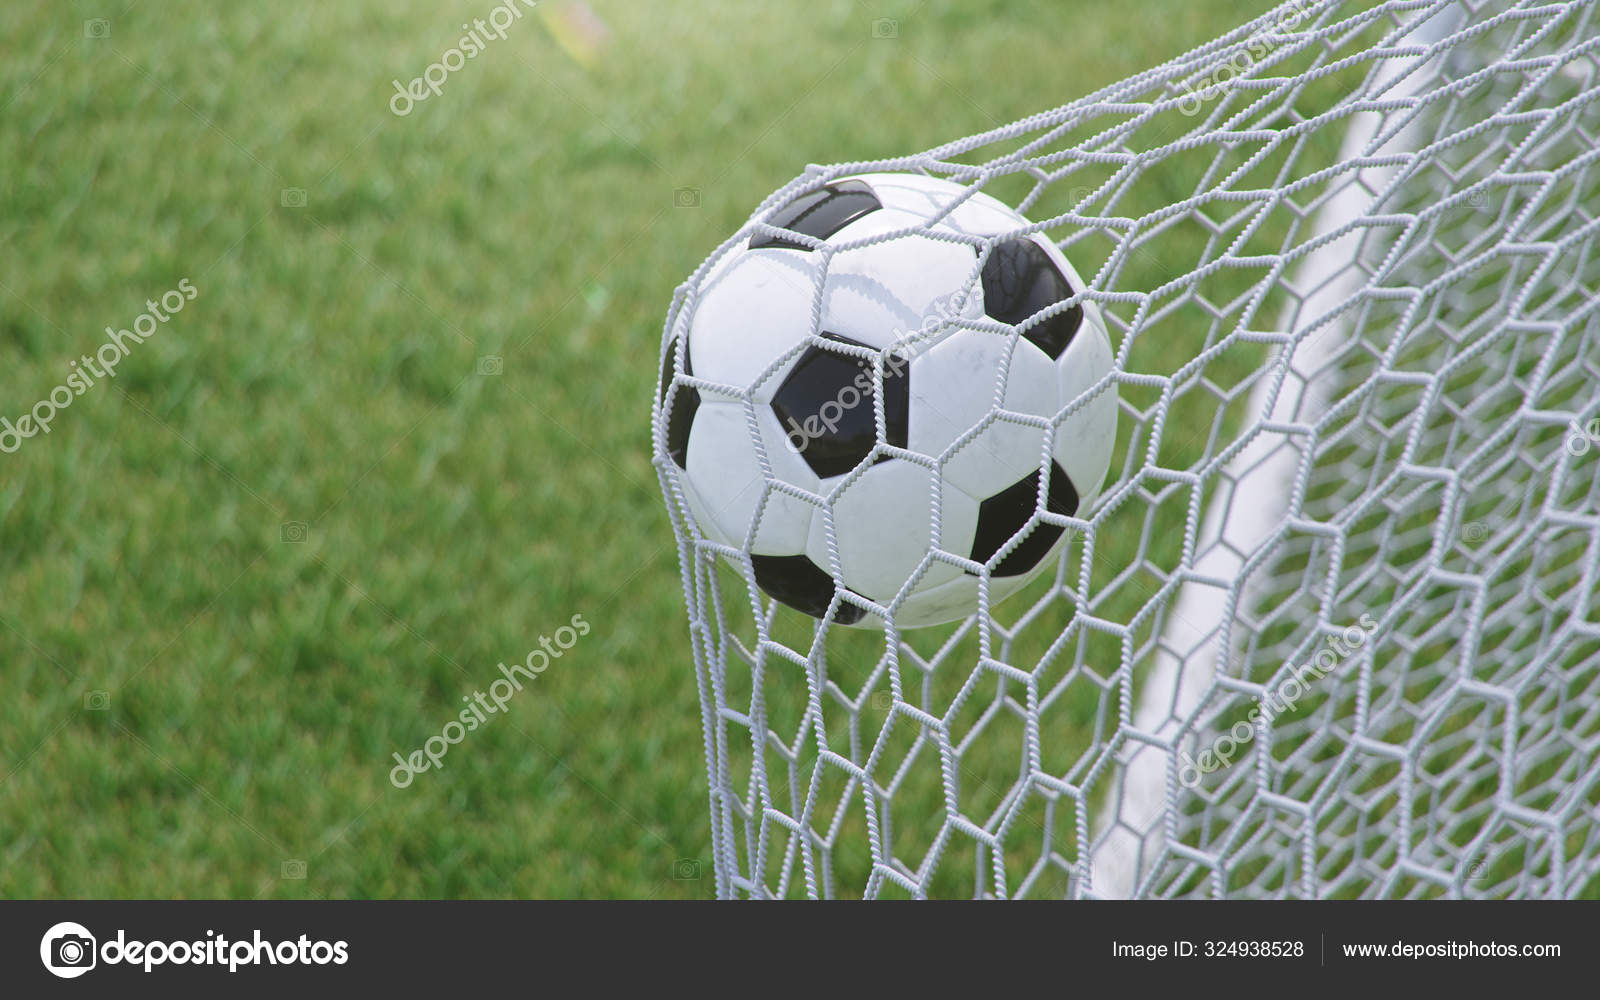 3d Illustration Soccer Ball Flew Into The Goal Soccer Ball Bends The Net Against The Background Of Grass Soccer Ball In Goal Net On Grass Background A Moment Of Delight Stock Photo